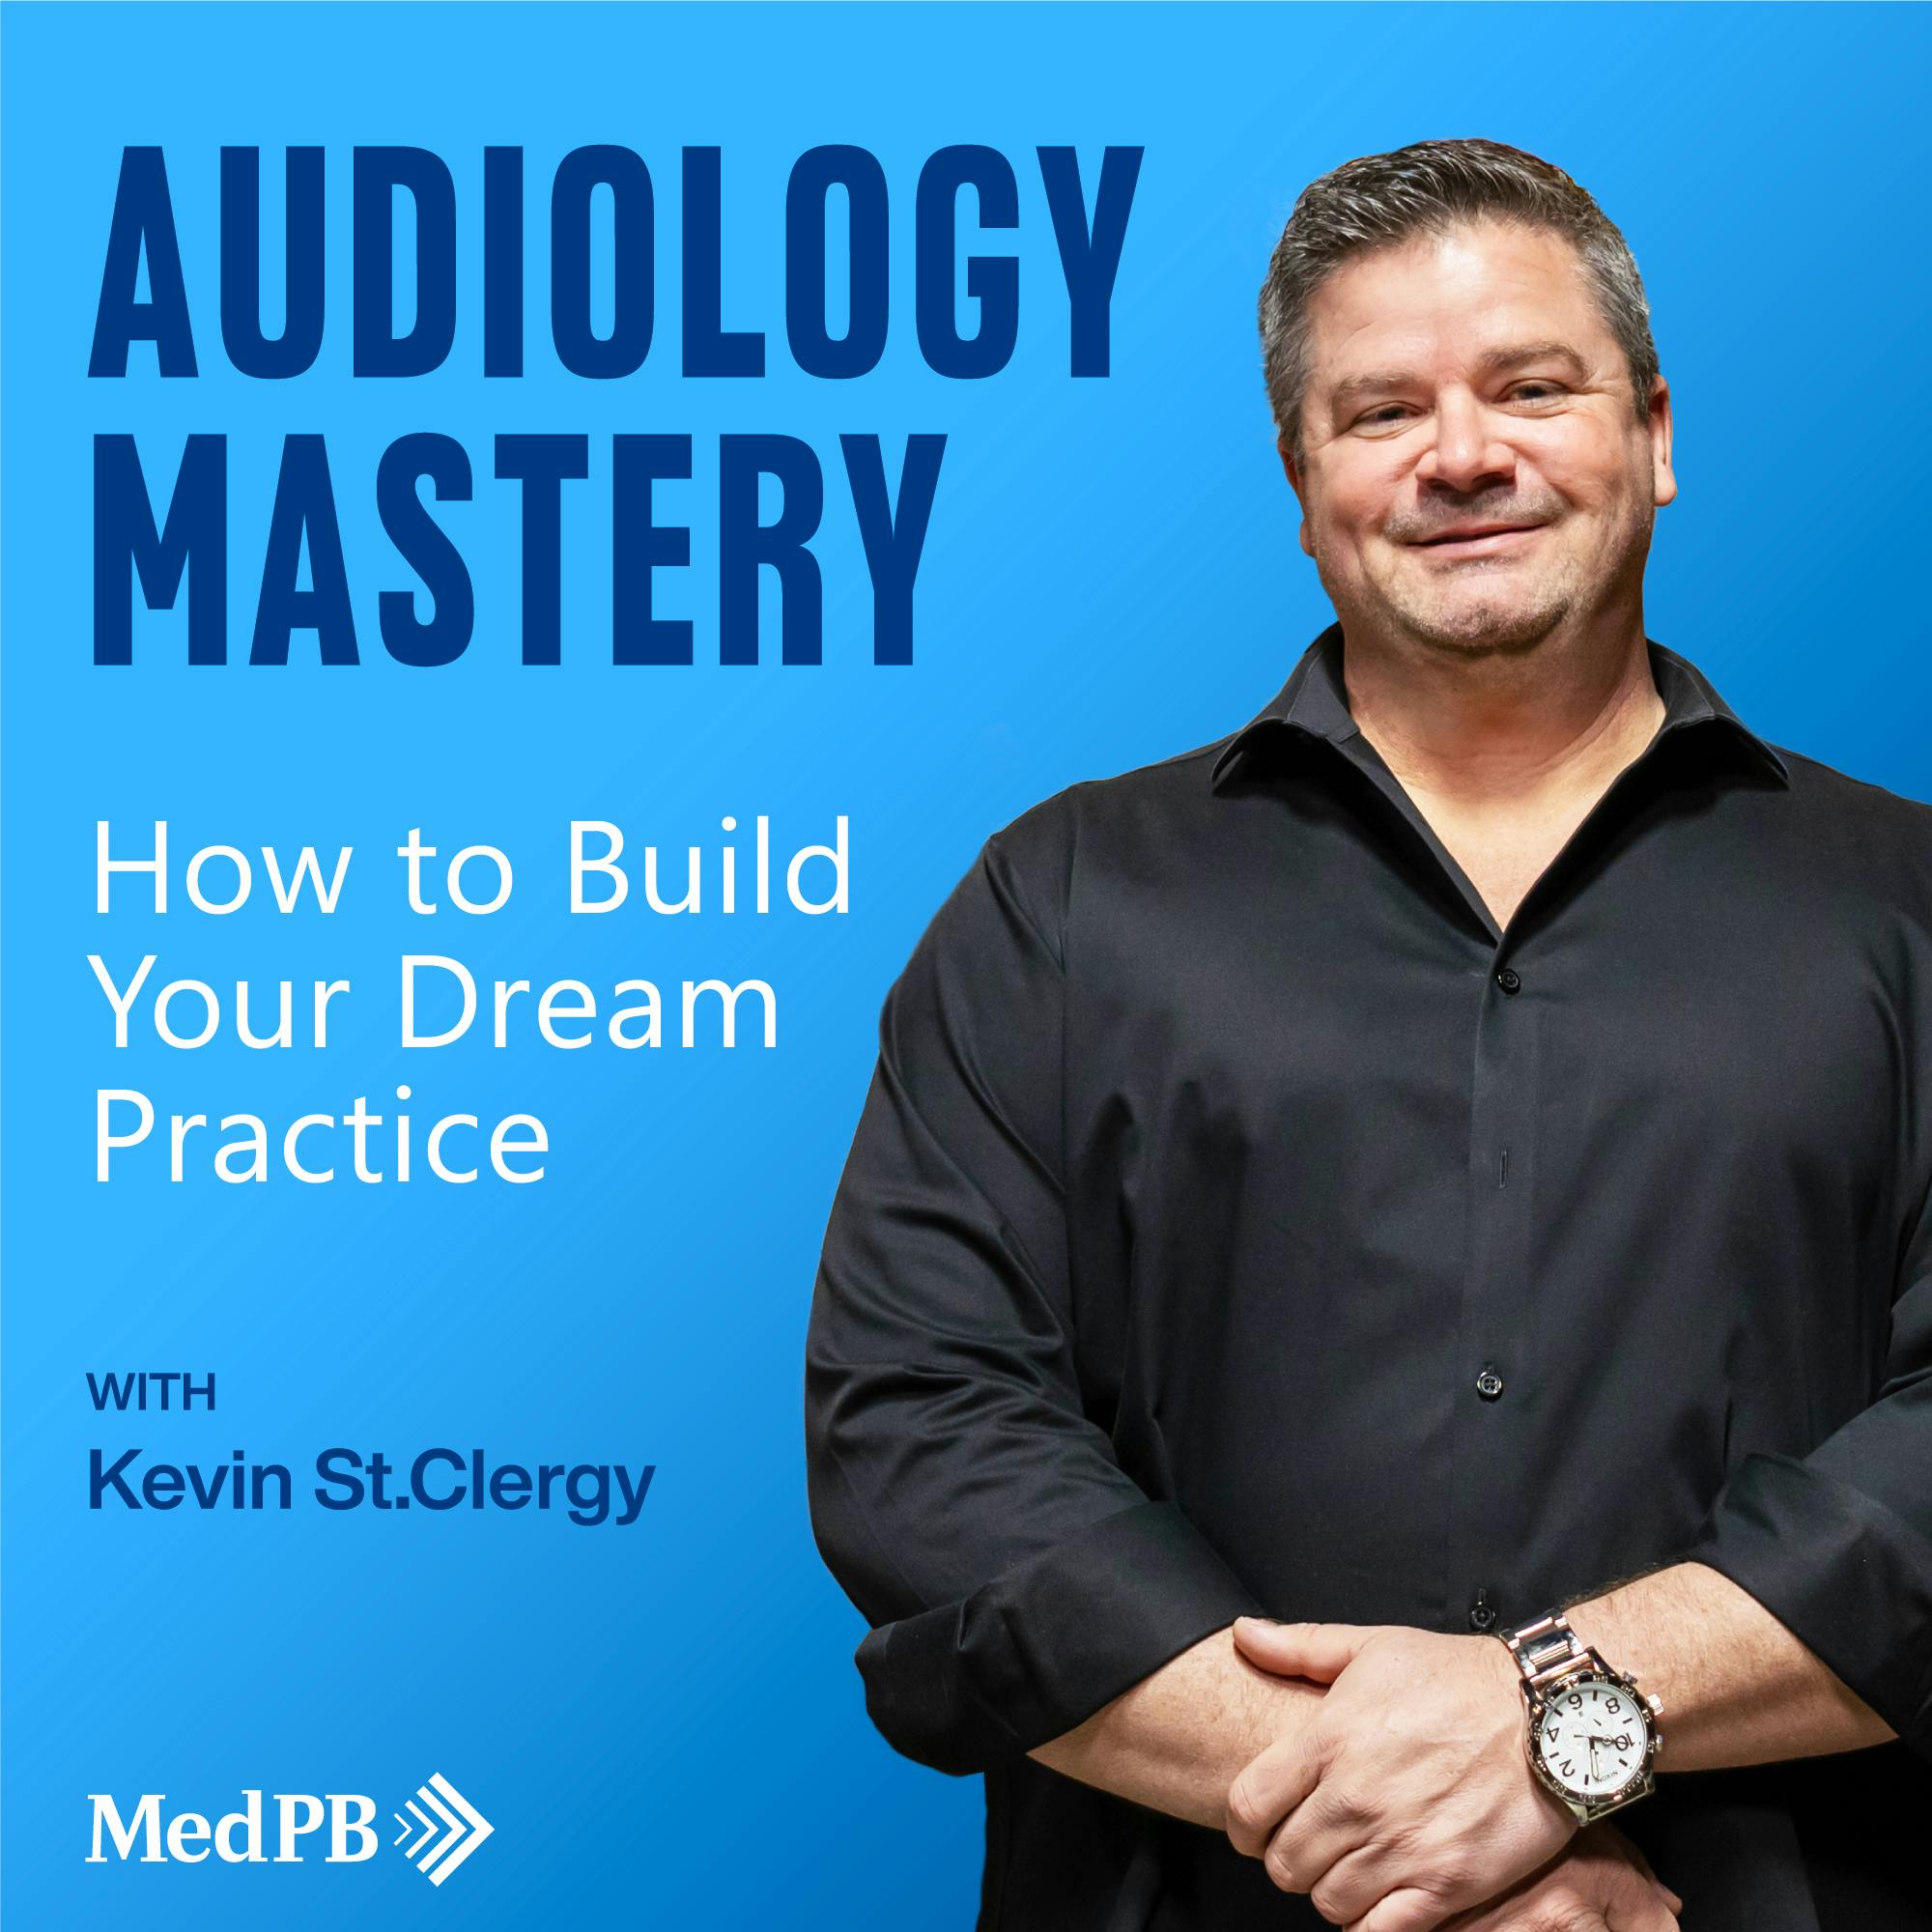 I Bought 14 Audiology Practices, Grew Them, Then Sold Them All! | Jesse Aldous by Kevin St.Clergy | MedPB